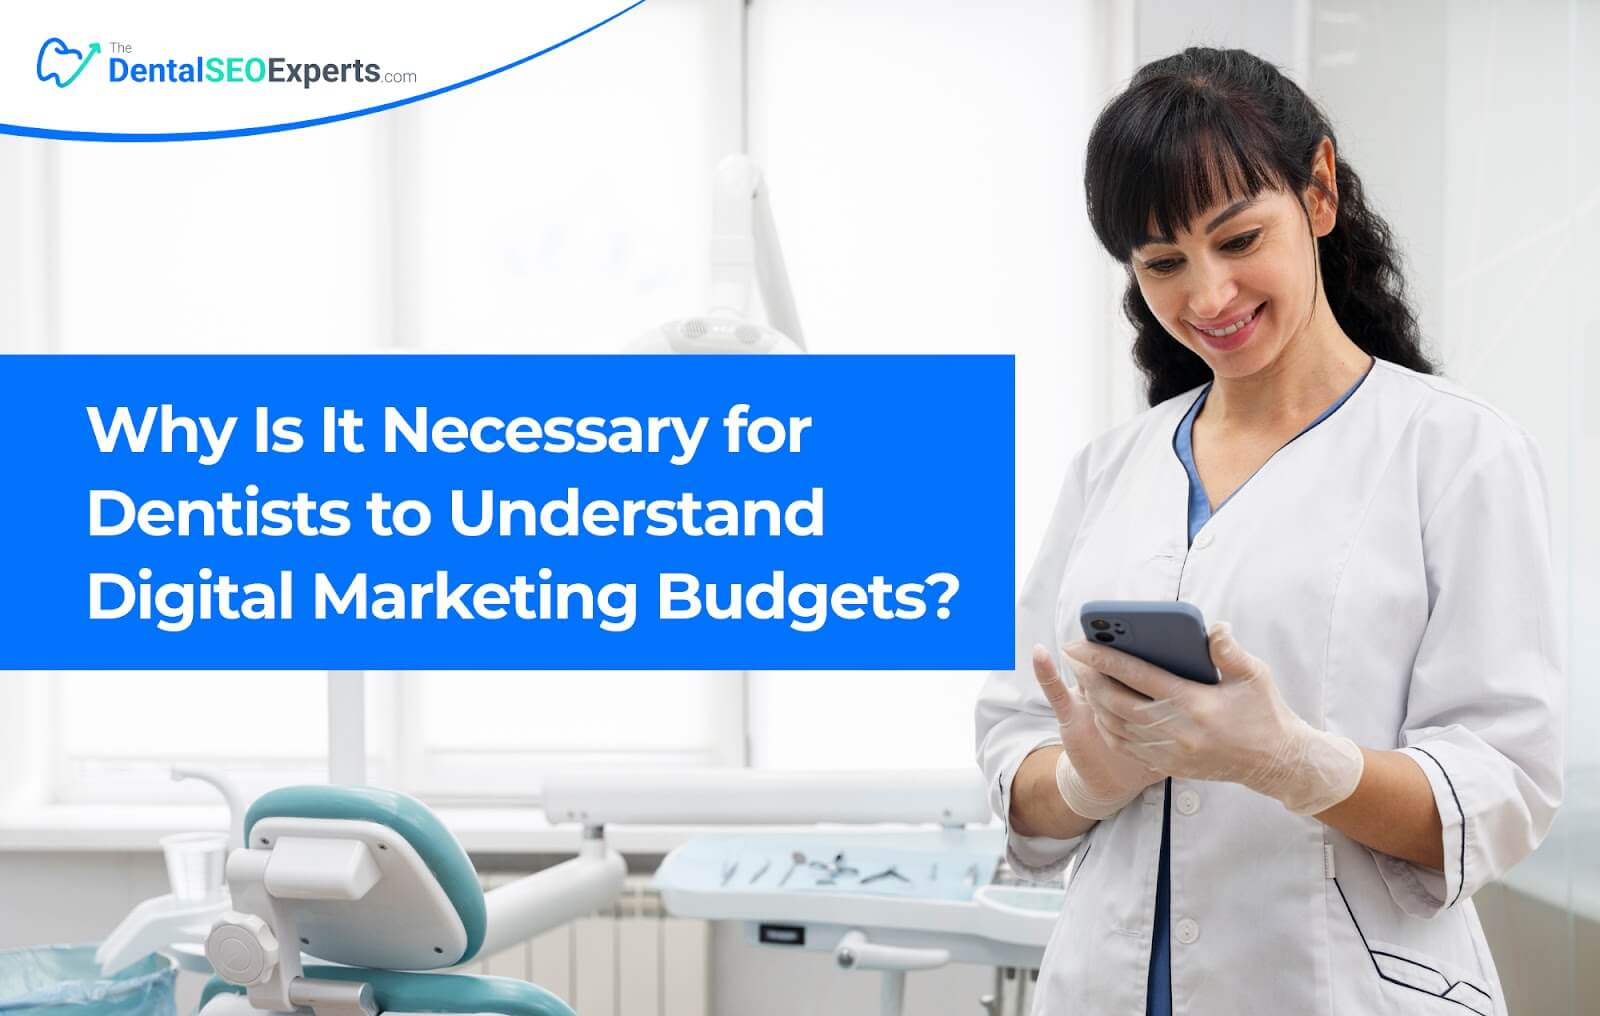 Why Is It Necessary for Dentists to Understand Digital Marketing Budgets?